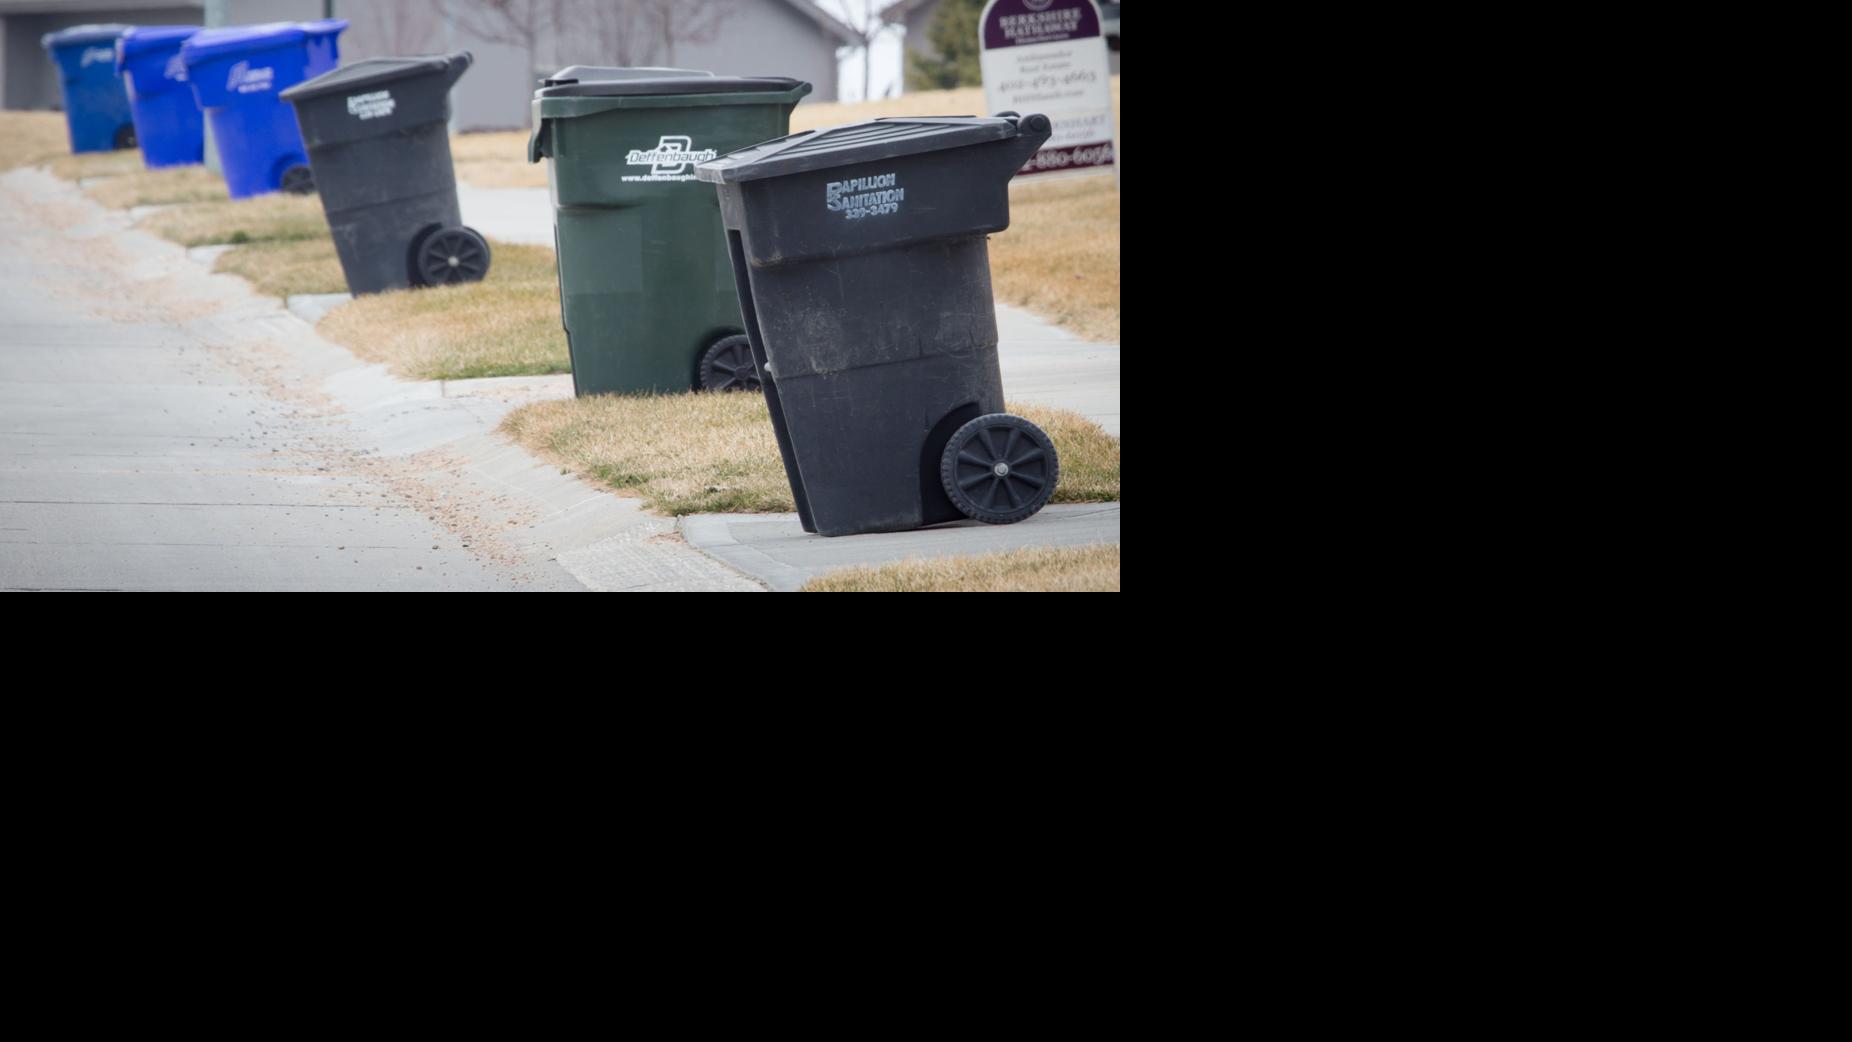 The future of Omaha trash collection? 96gallon covered carts, an end